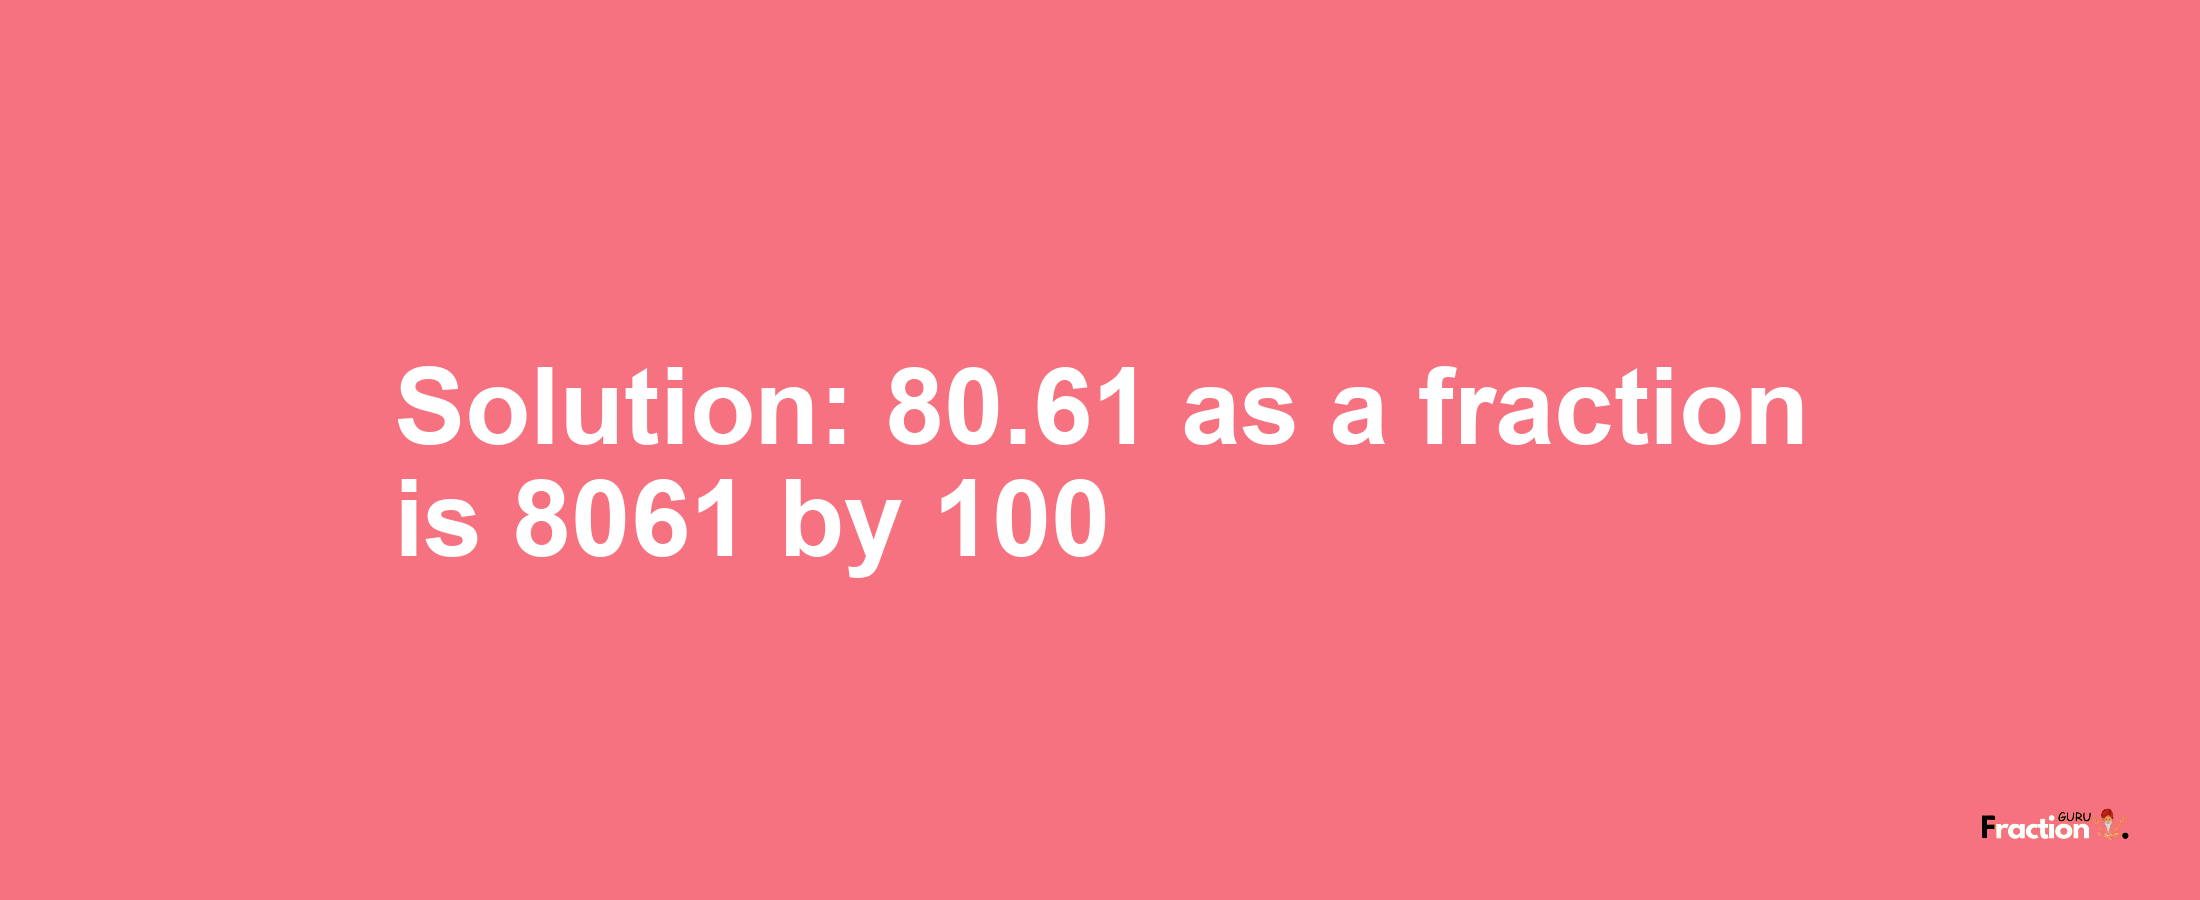 Solution:80.61 as a fraction is 8061/100